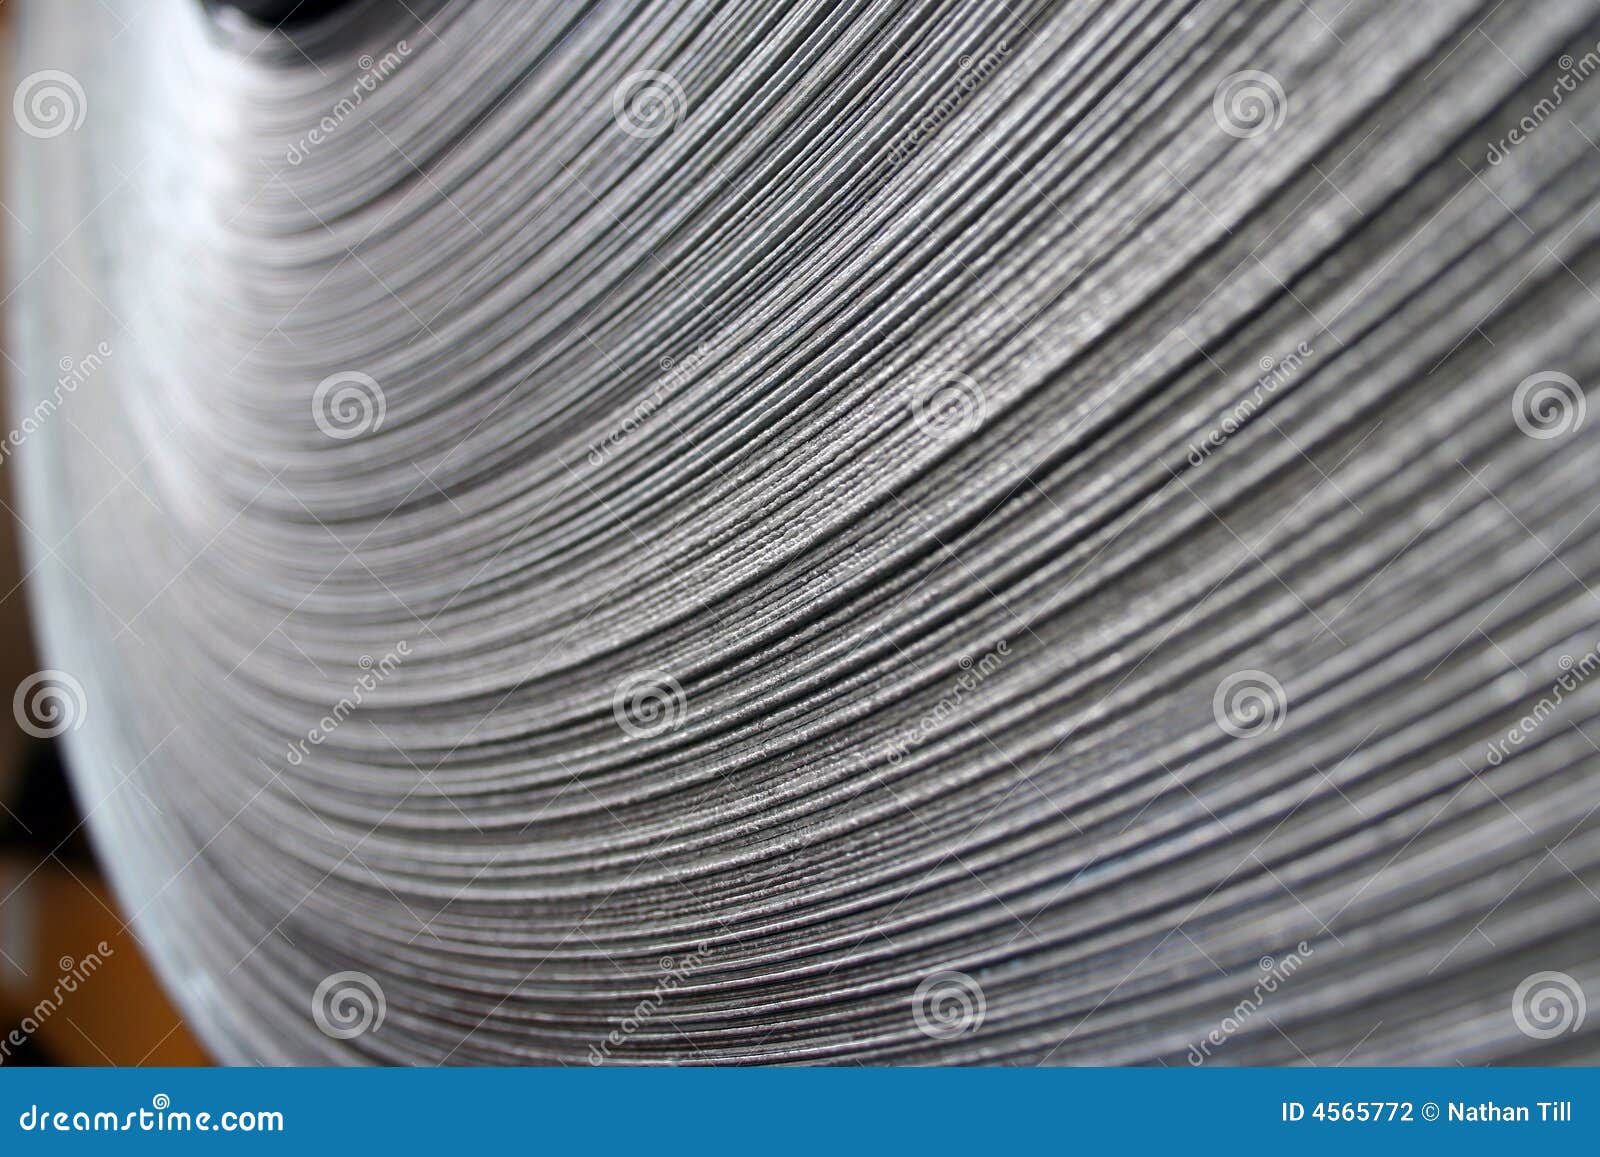 steel coil close-up